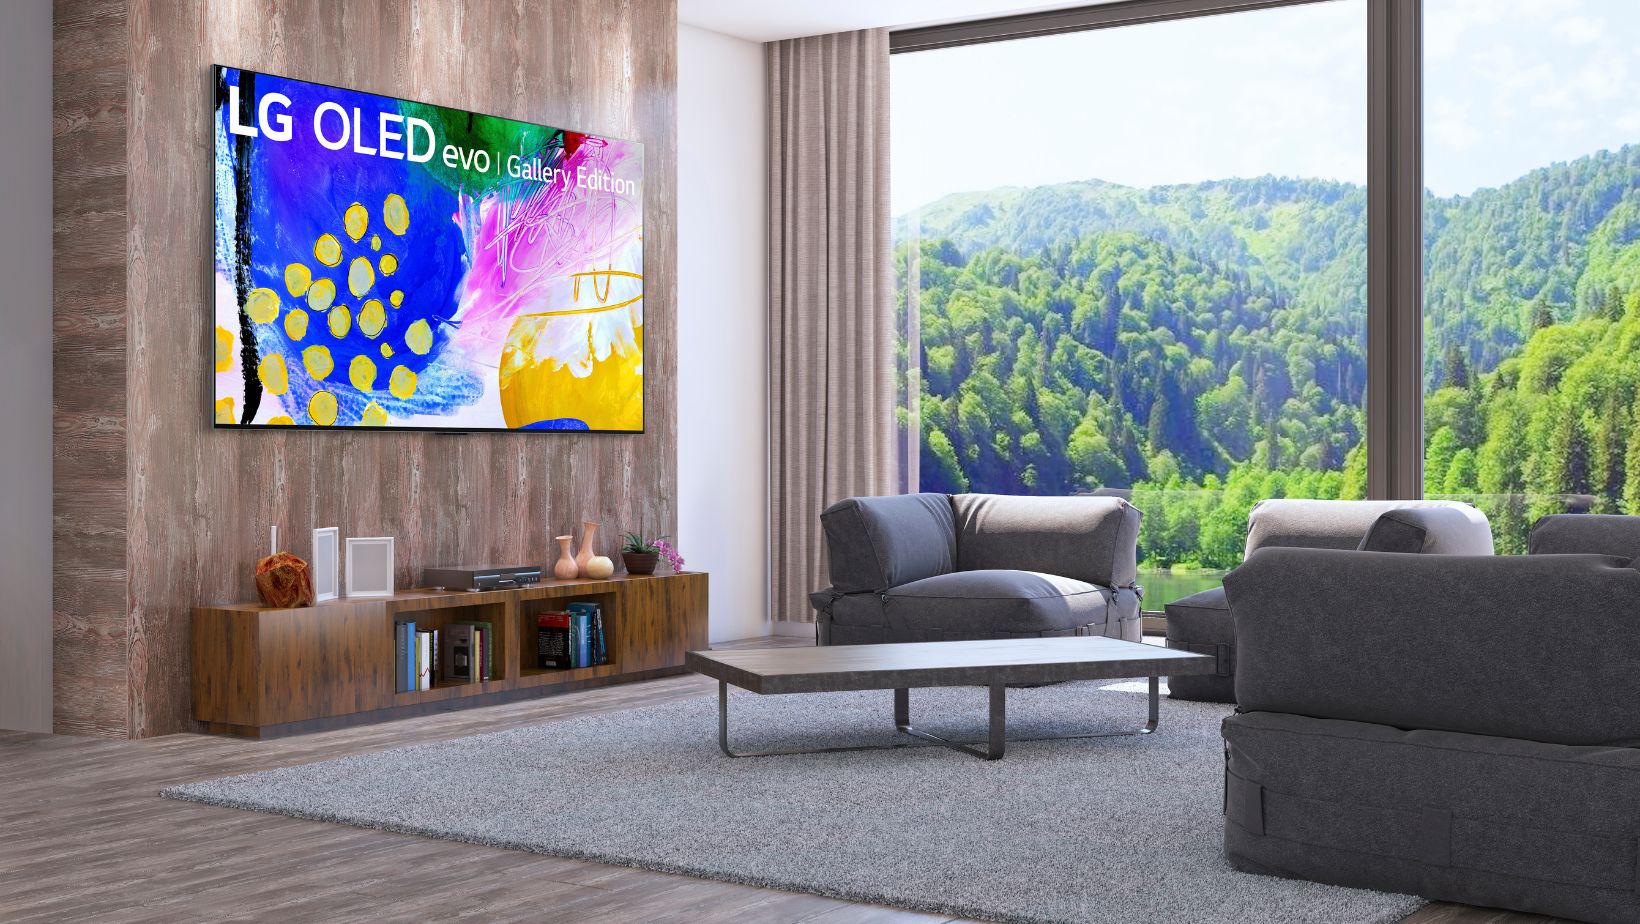 The 97" LG OLED evo TV is mounted on a wall. Underneath the TV is an entertainment console with a media player and decorative objects on it. The TV is across from a grey sectional and a coffee table.